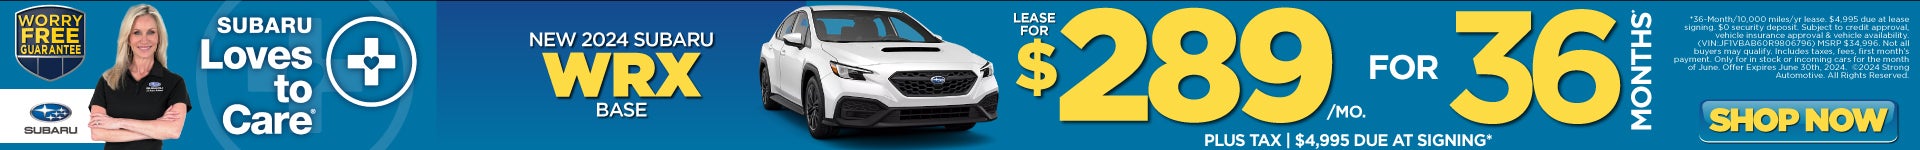 New 2024 Subaru WRX Base | Lease for $289/mo for 36 months*